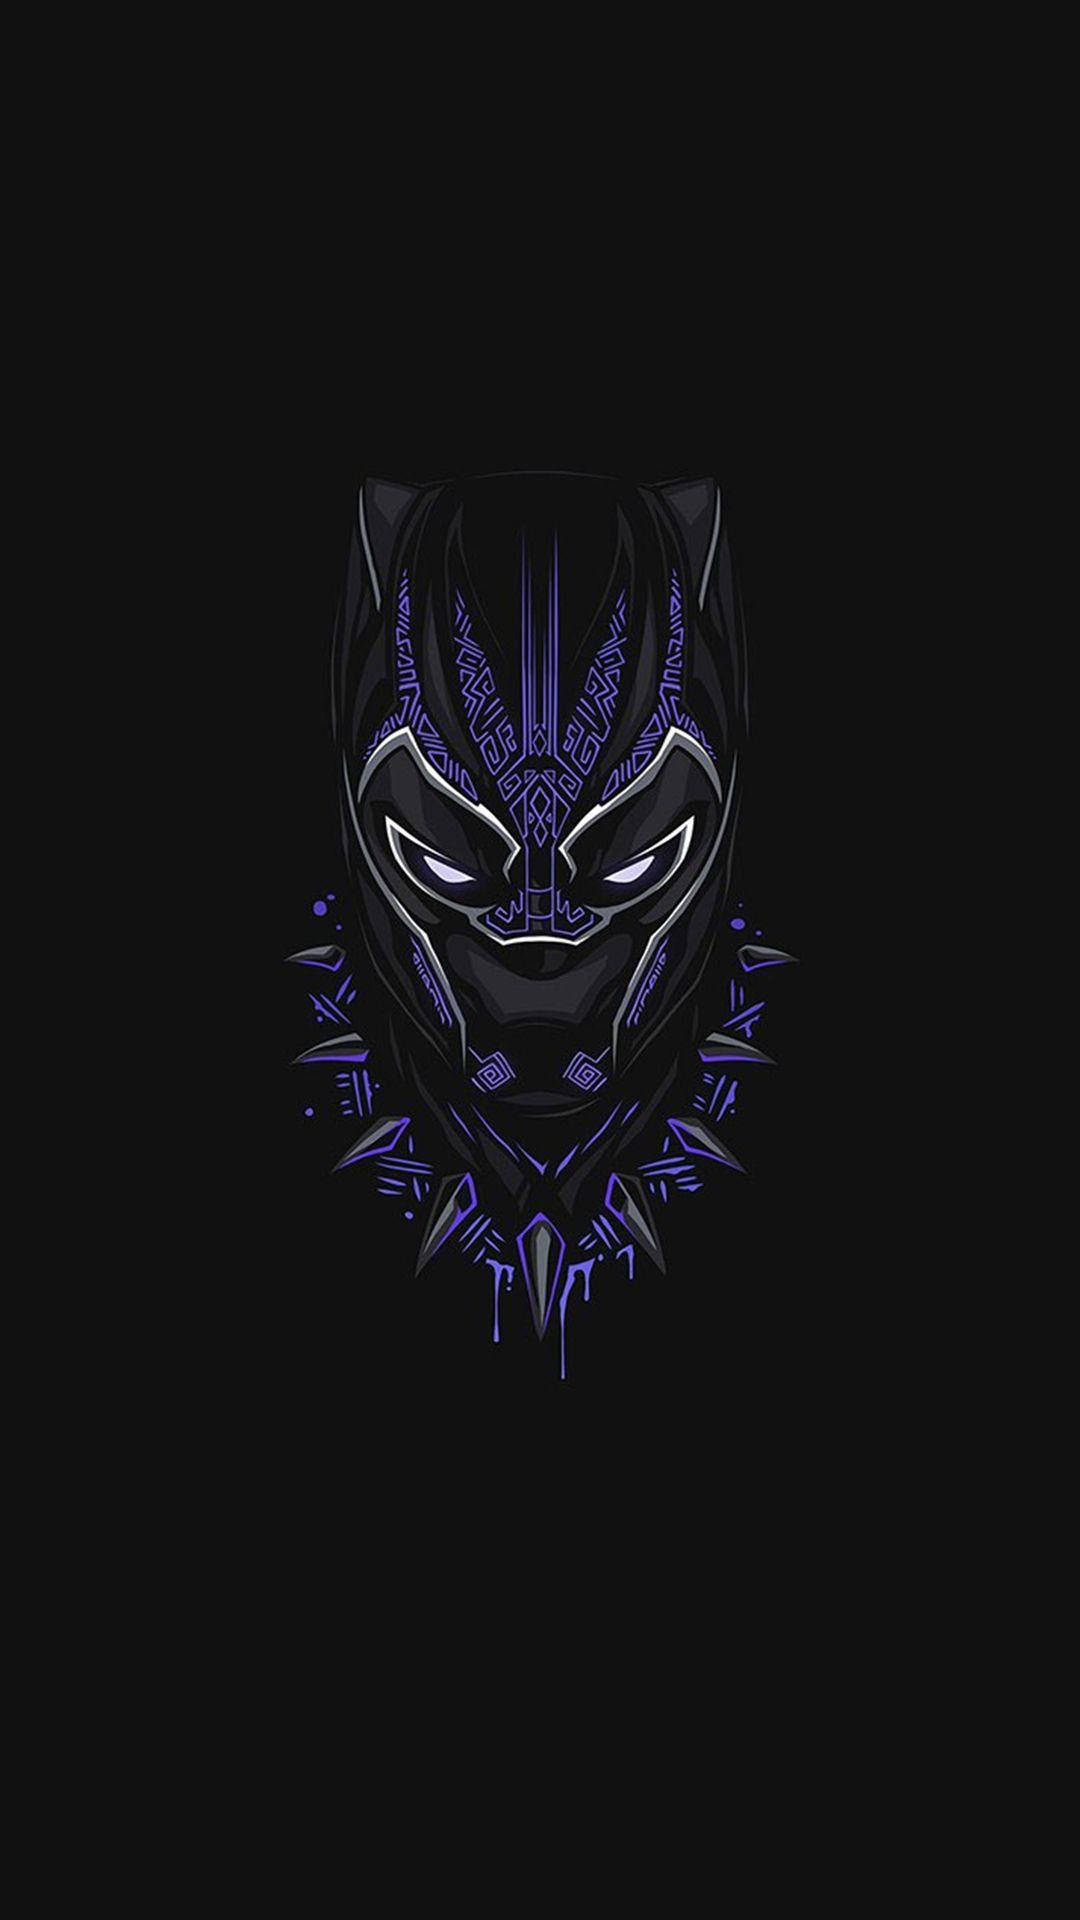 Free Black Panther Android Wallpaper Downloads, [100+] Black Panther  Android Wallpapers for FREE 